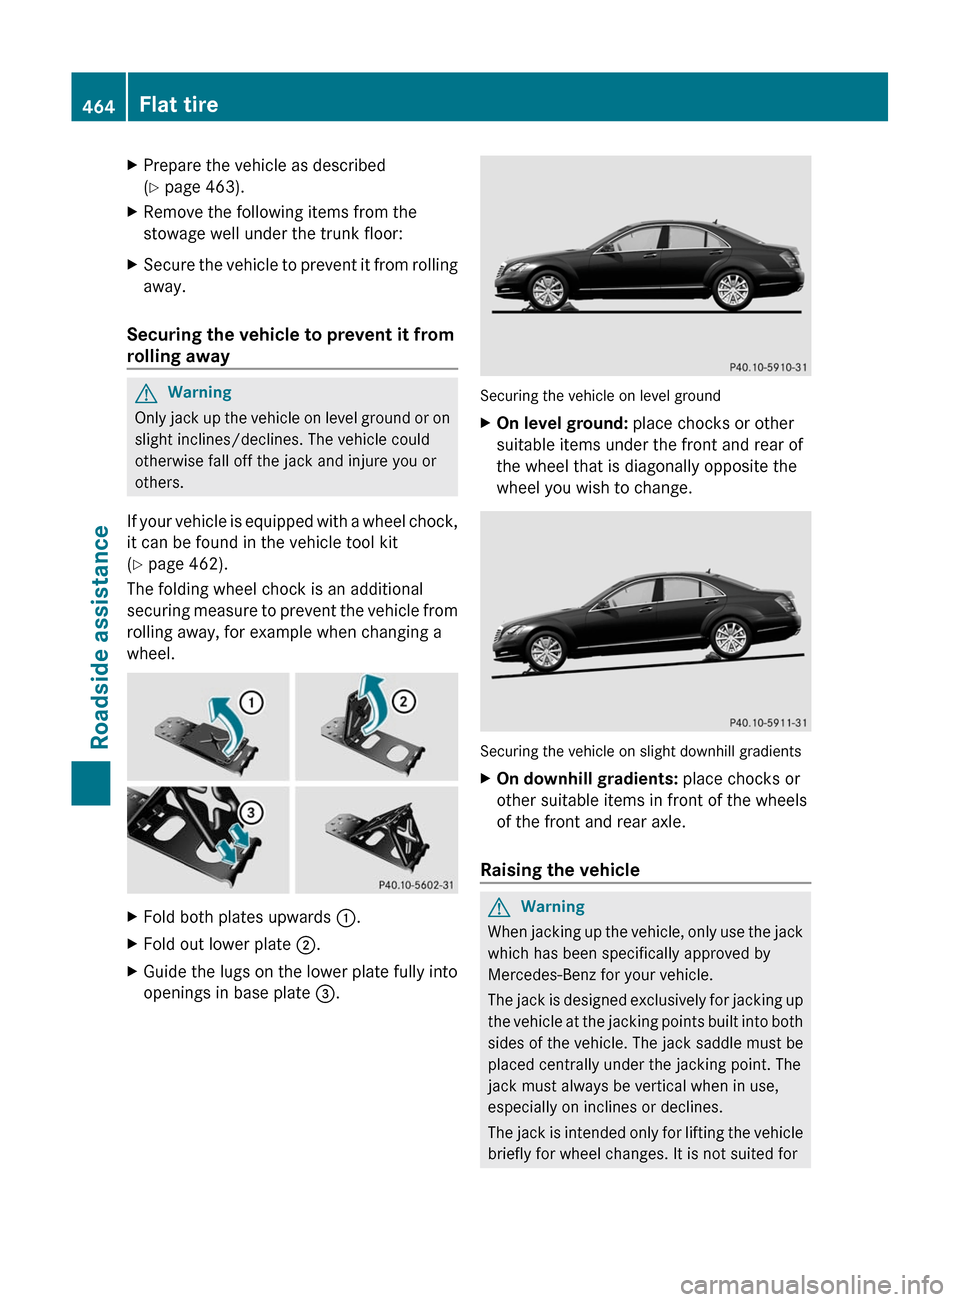 MERCEDES-BENZ S-Class 2011 W221 Owners Manual XPrepare the vehicle as described
(Y page 463).
XRemove the following items from the
stowage well under the trunk floor:
XSecure the vehicle to prevent it from rolling
away.
Securing the vehicle to pr